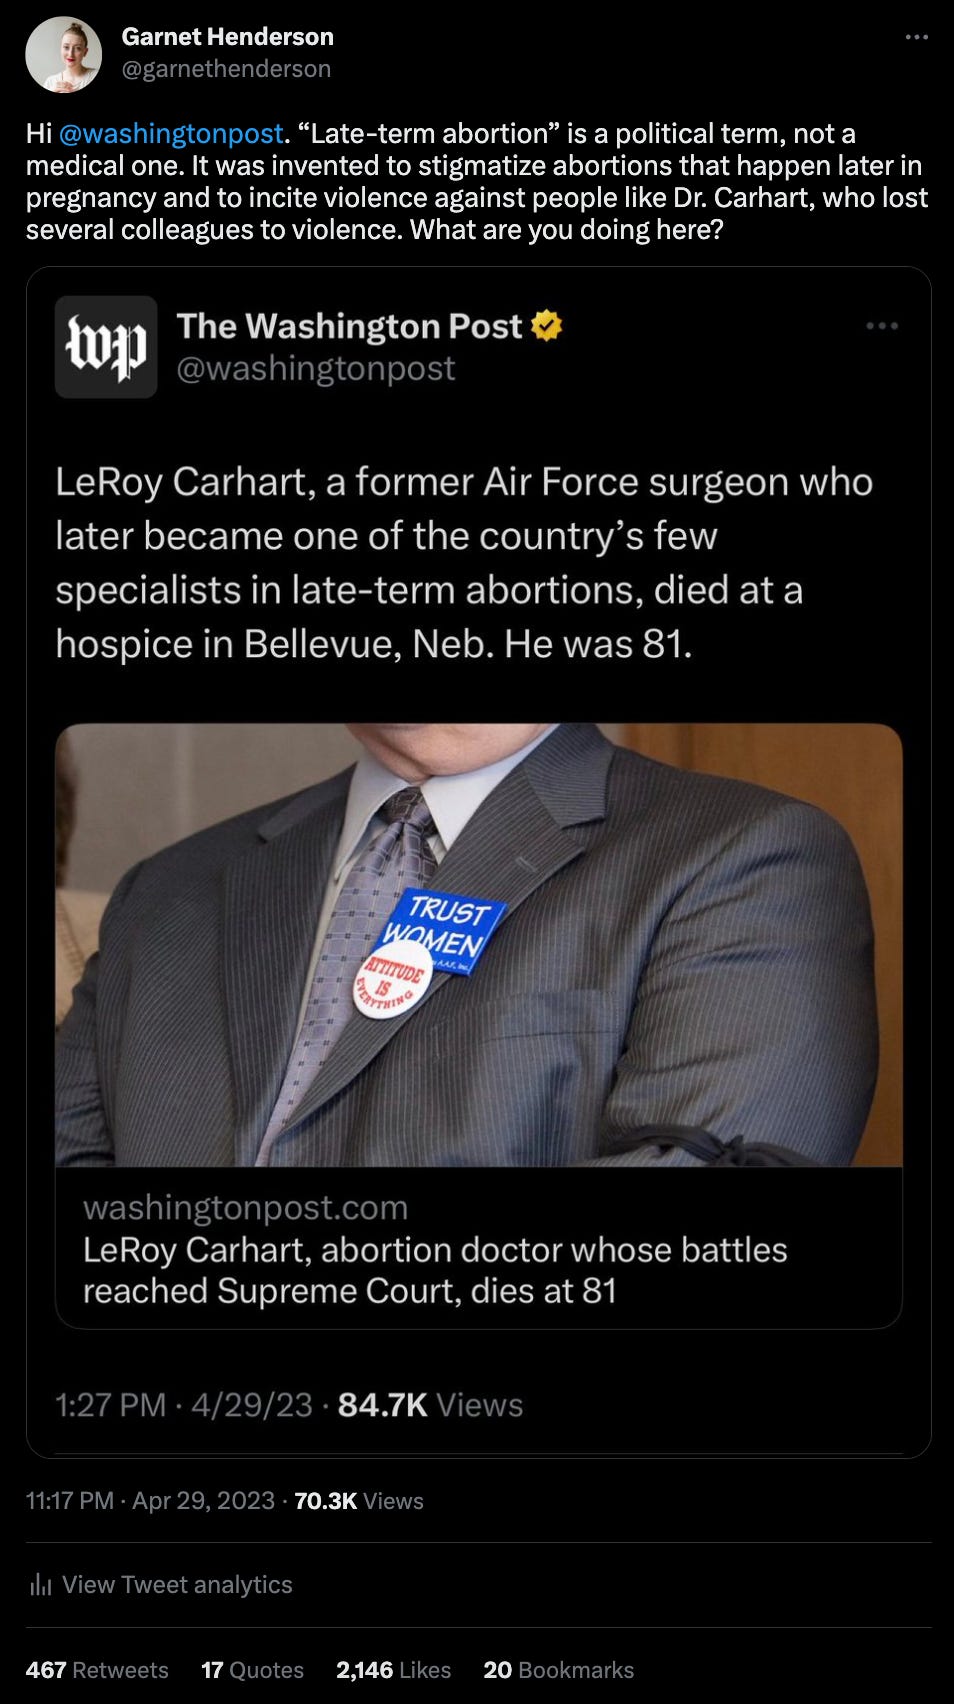 A tweet from Garnet Henderson that says, "Hi  @washingtonpost . “Late-term abortion” is a political term, not a medical one. It was invented to stigmatize abortions that happen later in pregnancy and to incite violence against people like Dr. Carhart, who lost several colleagues to violence. What are you doing here?"